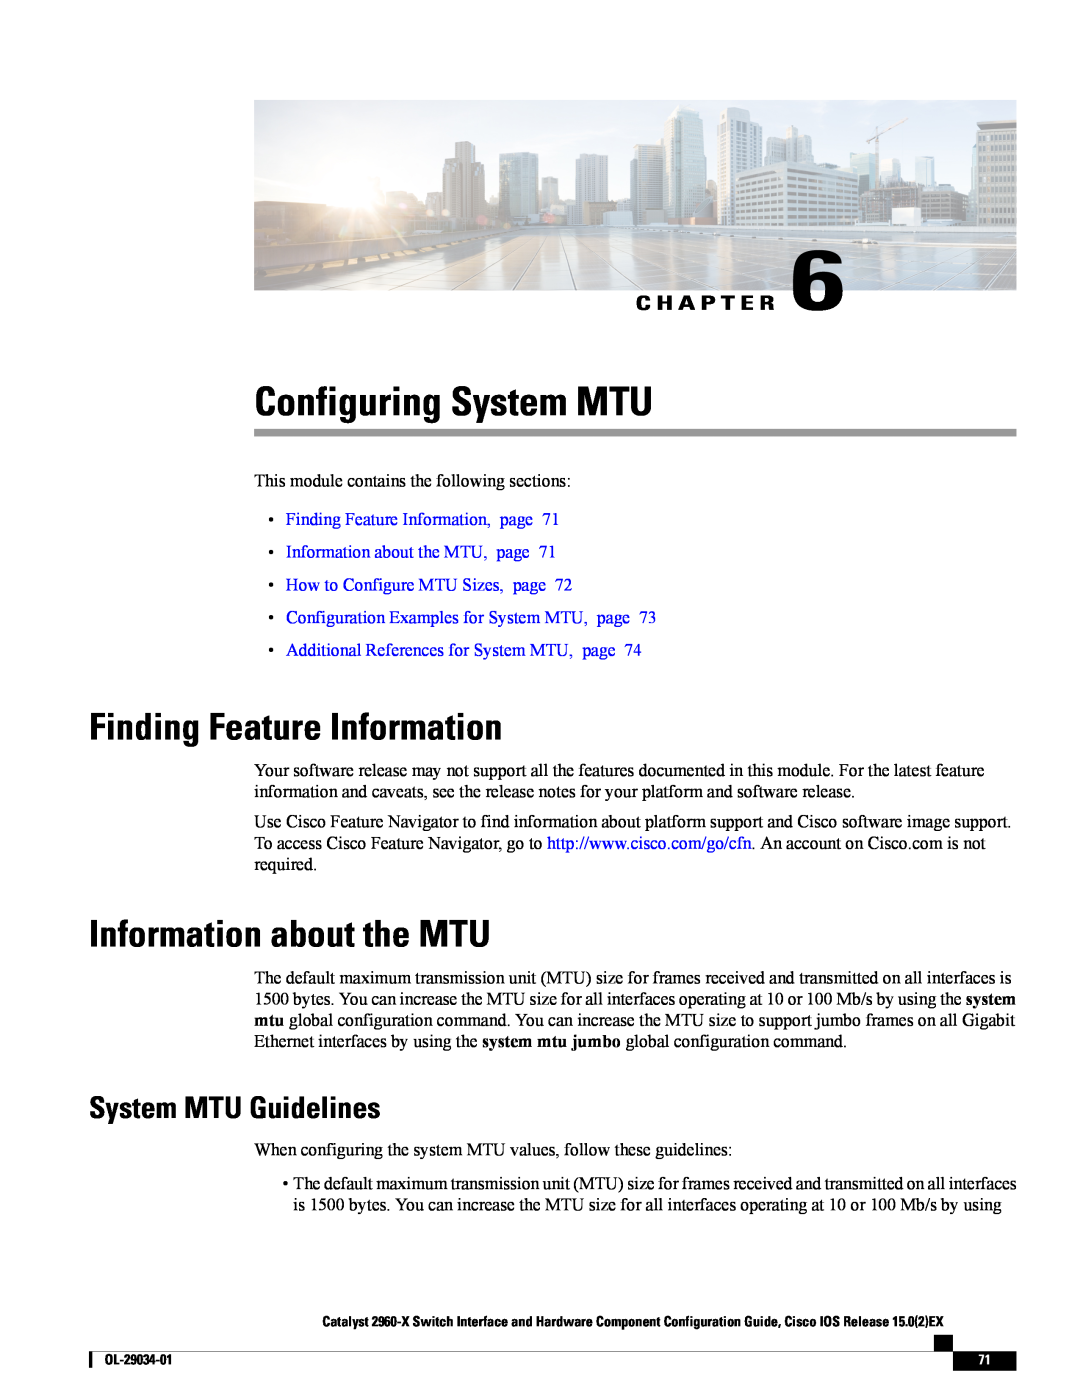 Cisco Systems WSC2960X48TDL manual Configuring System MTU, Information about the MTU, System MTU Guidelines, C H A P T E R 